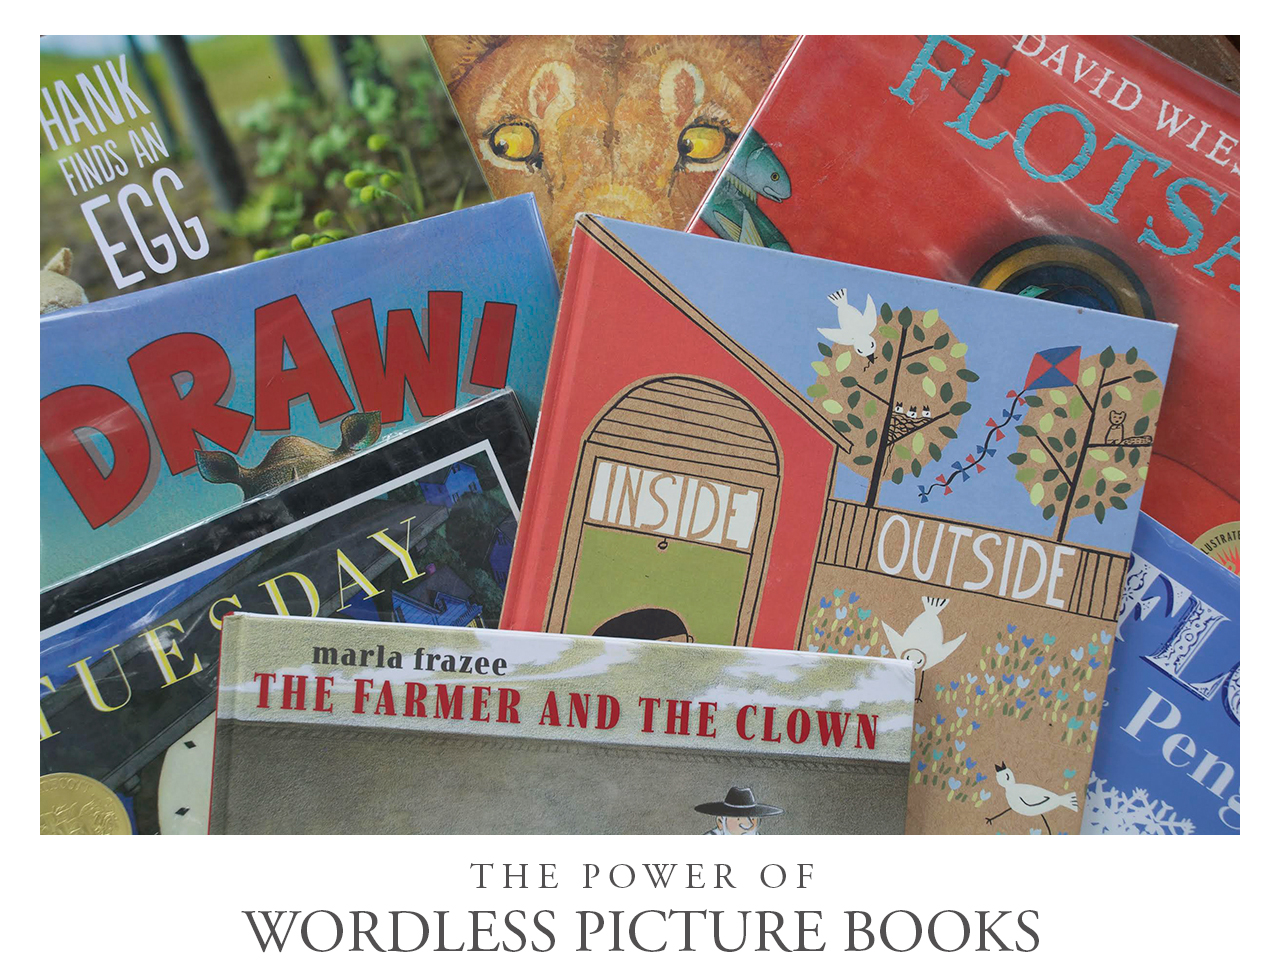 The Power of Wordless Picture Books